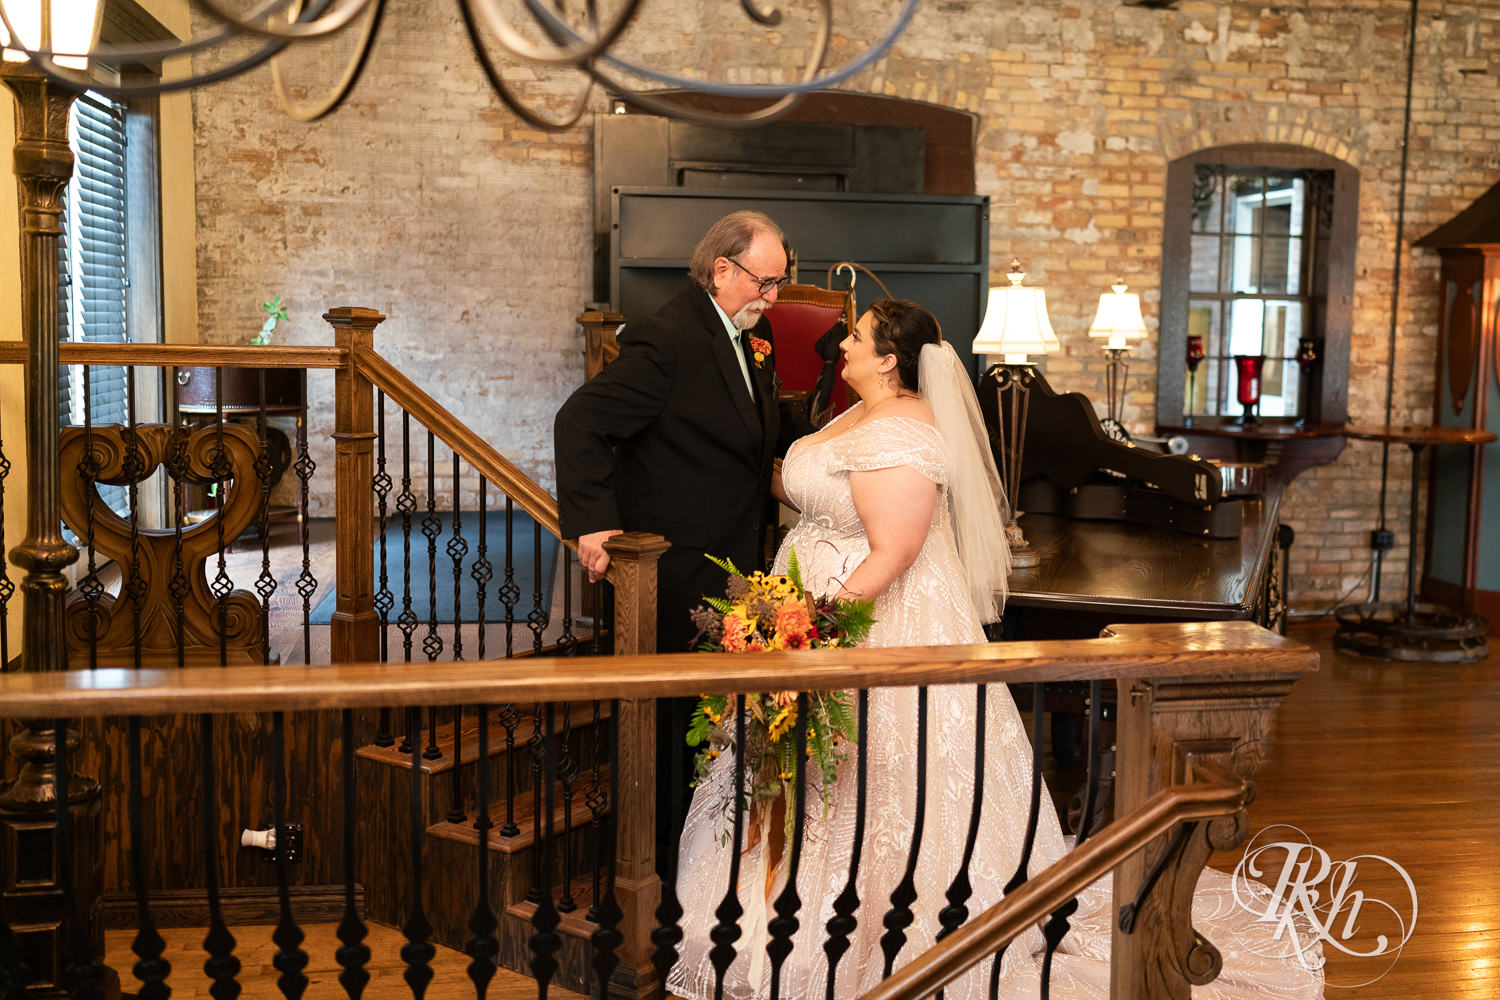 Plus size bride doing first look with dad at Kellerman's Event Center in White Bear Lake, Minnesota.